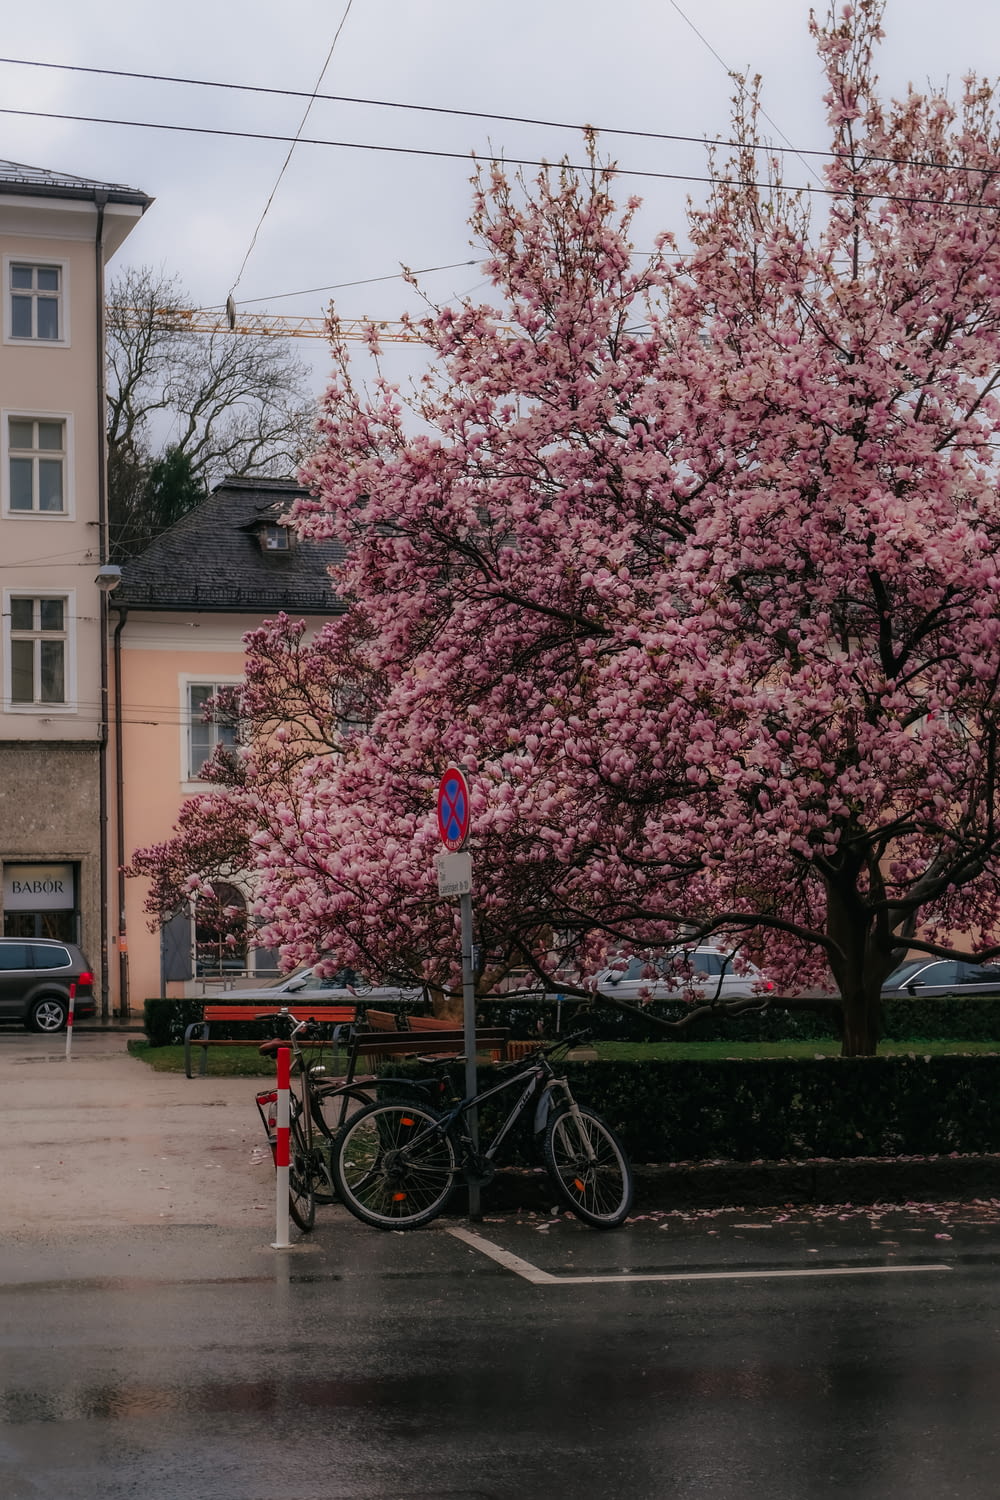 a bike parked next to a tree with pink flowers